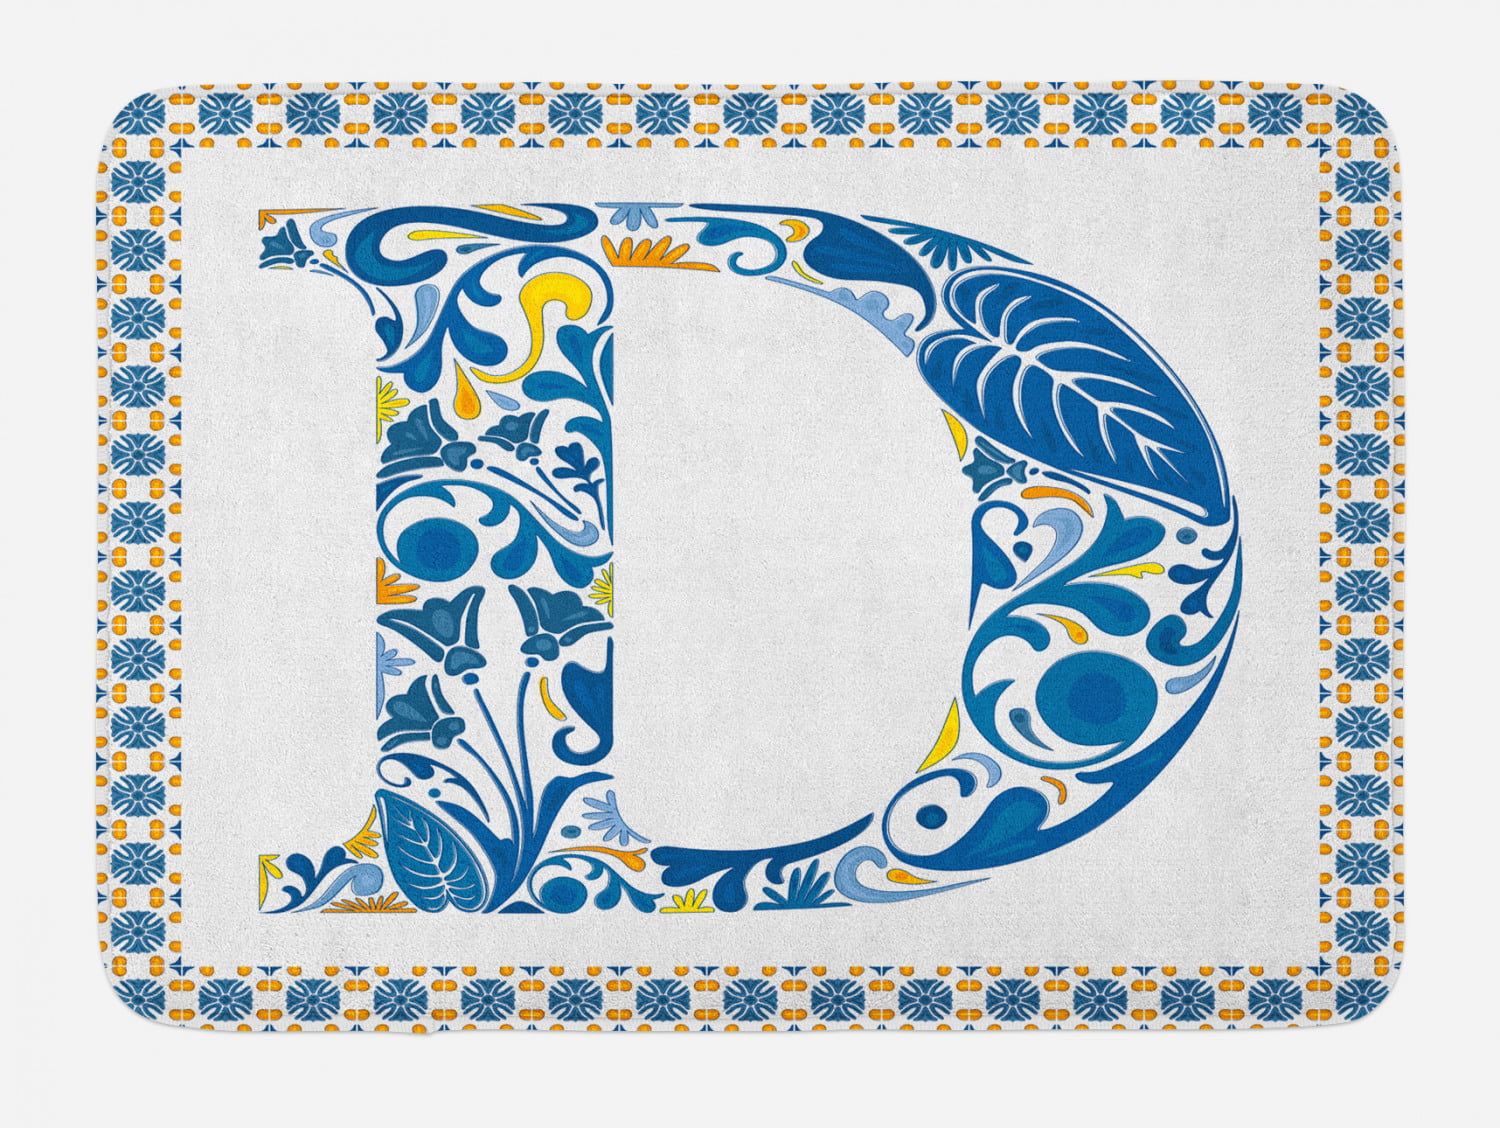 Letter D Bath Mat, Vibrant Colored Swirls and Flower Elements in ...